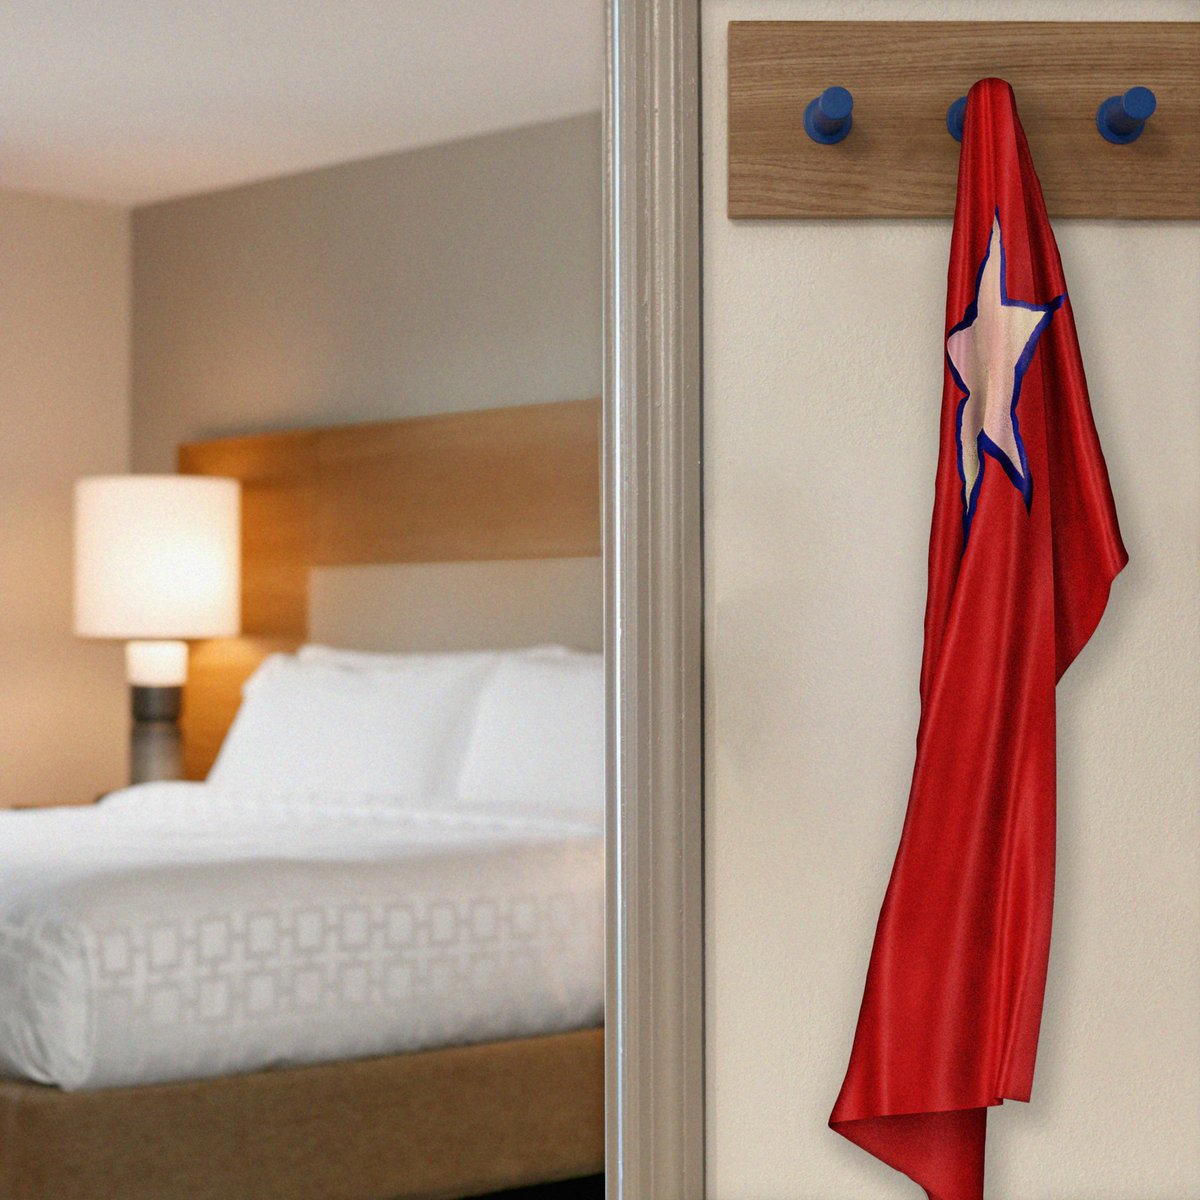 Super-sized suites fit for a super hero. #Halloween #CandlewoodSuites